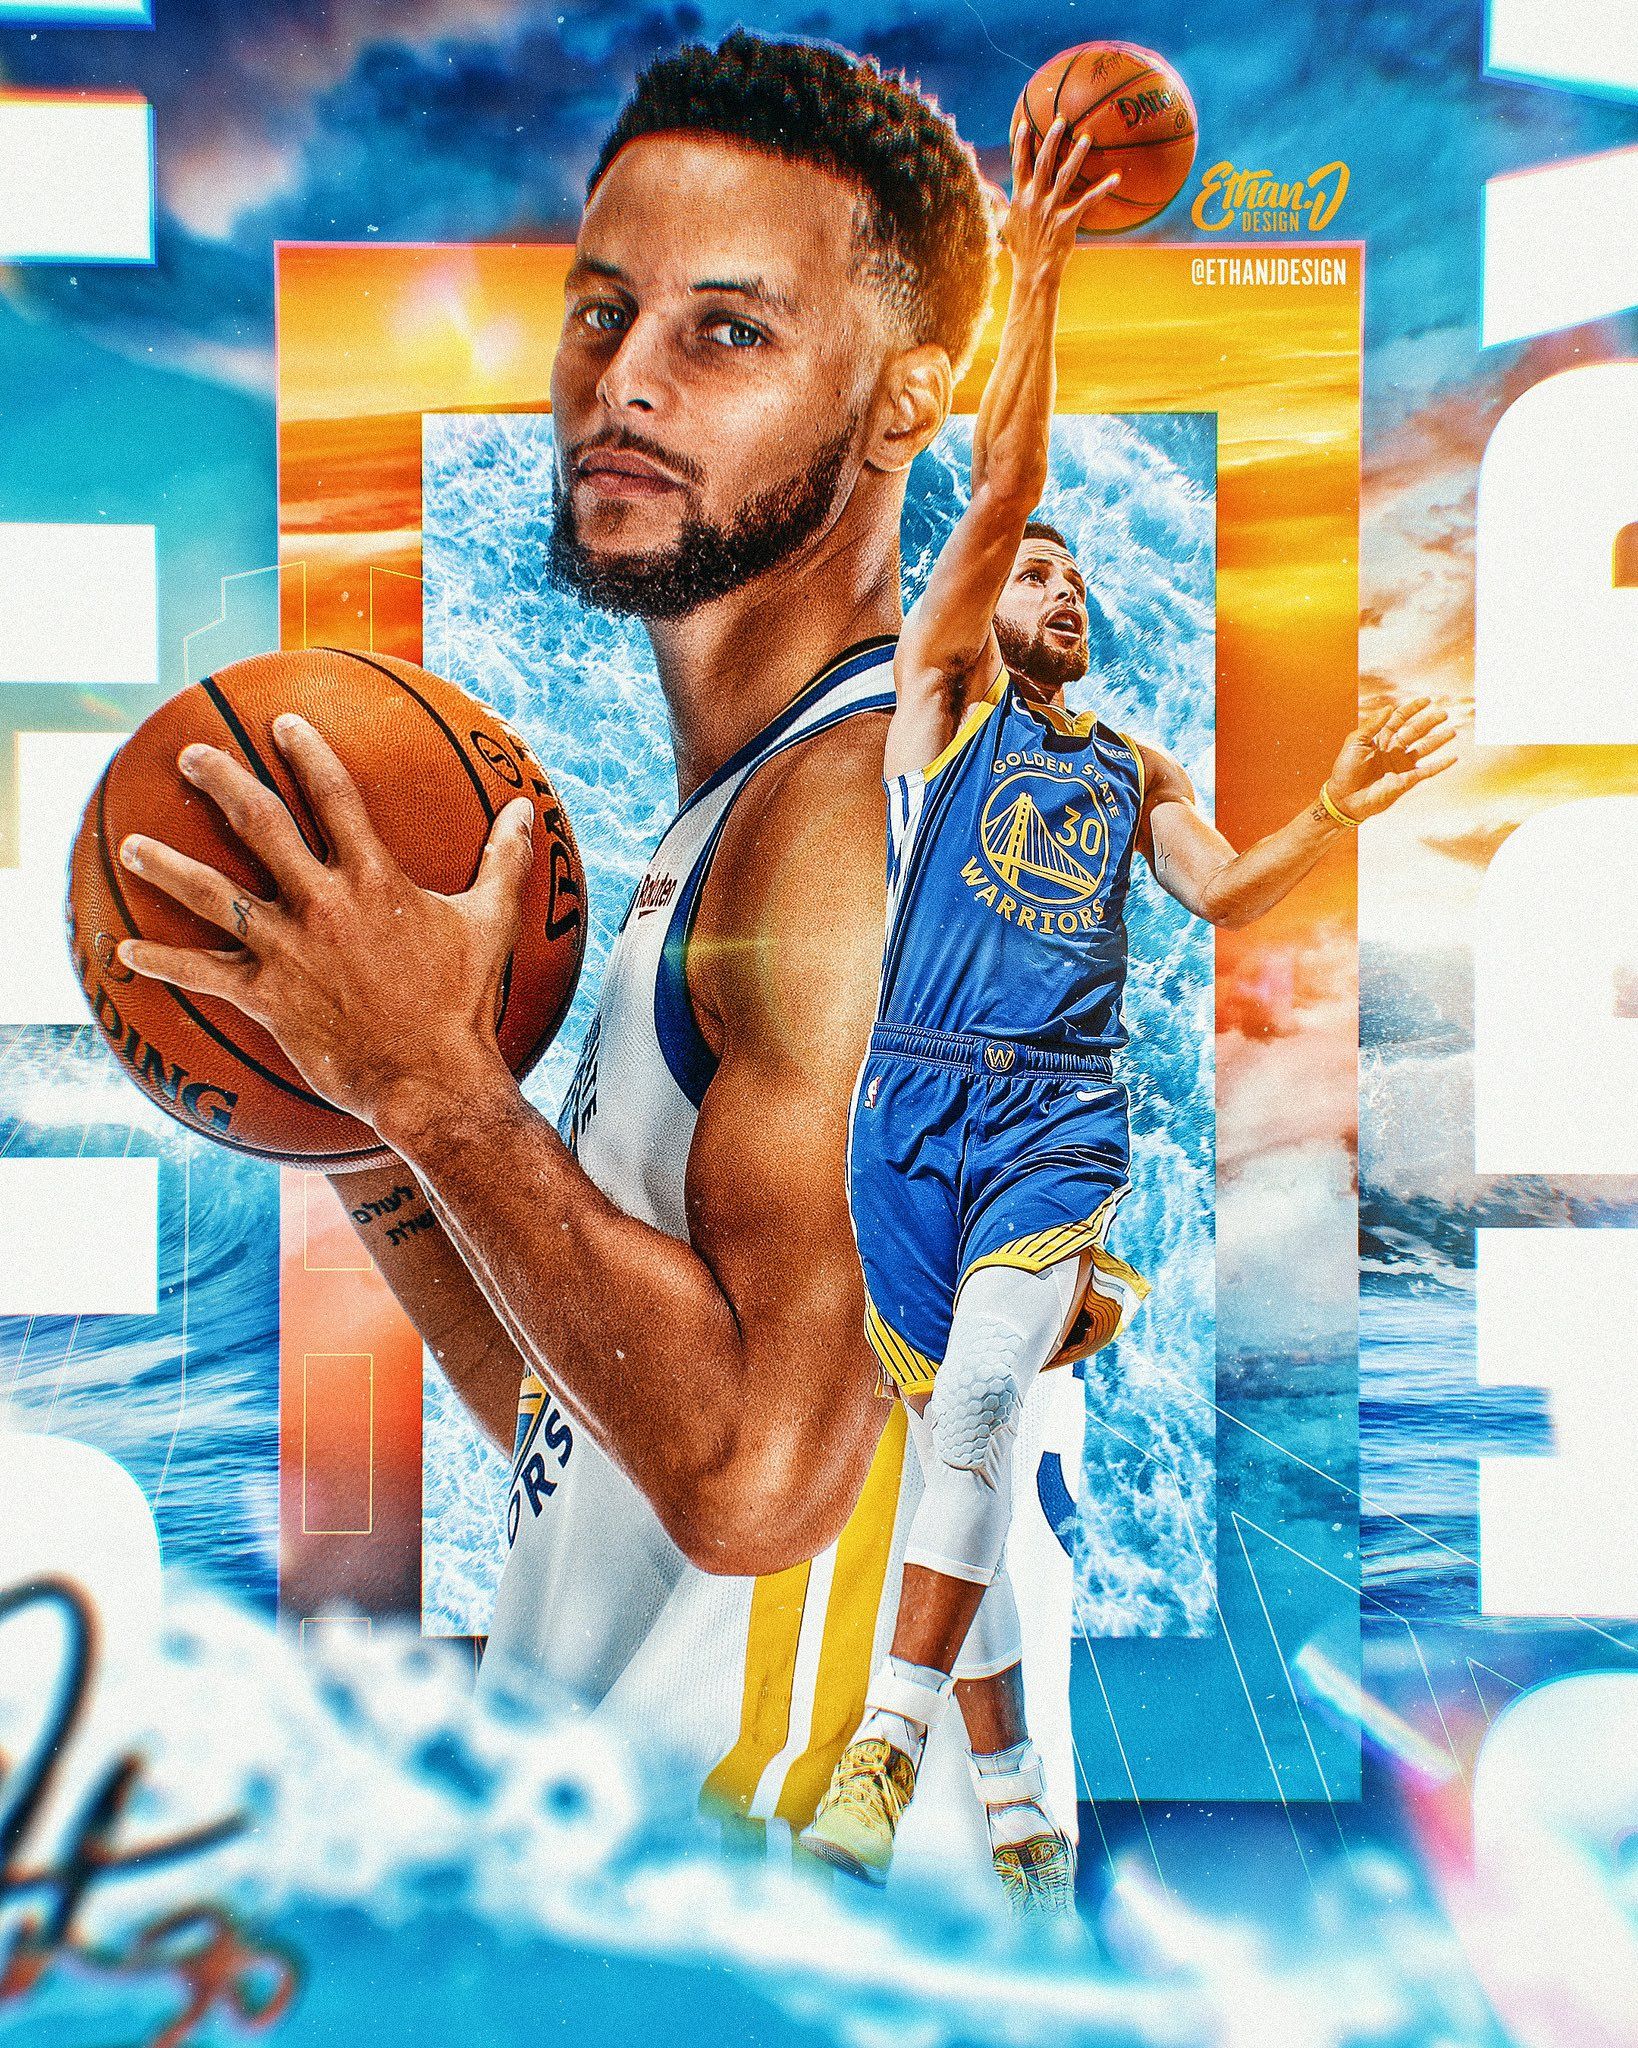 Twitter. Steph curry wallpaper, Stephen curry wallpaper, Curry wallpaper